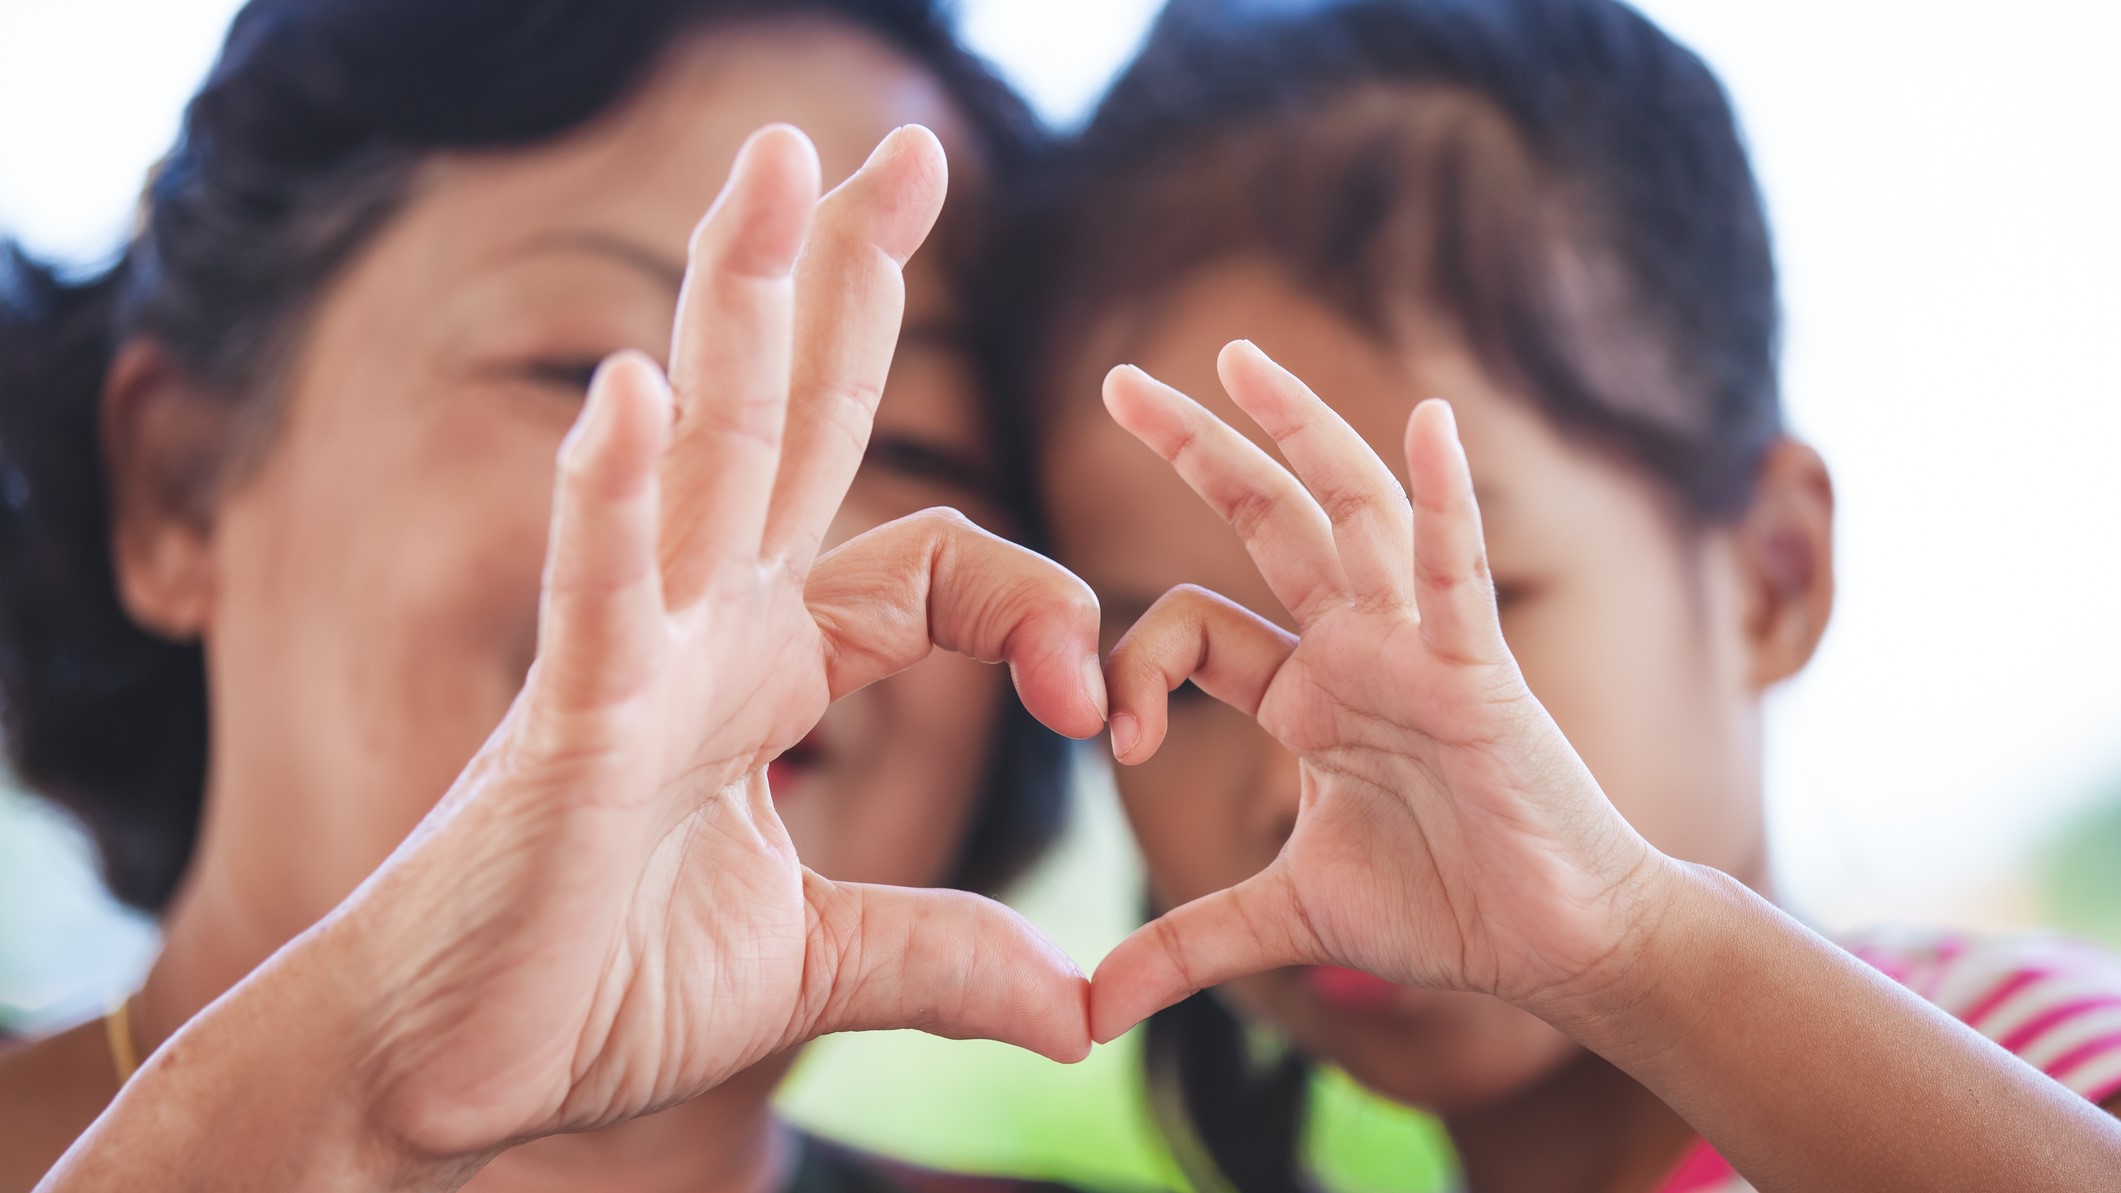 mom and daughter making heart symbol with hands